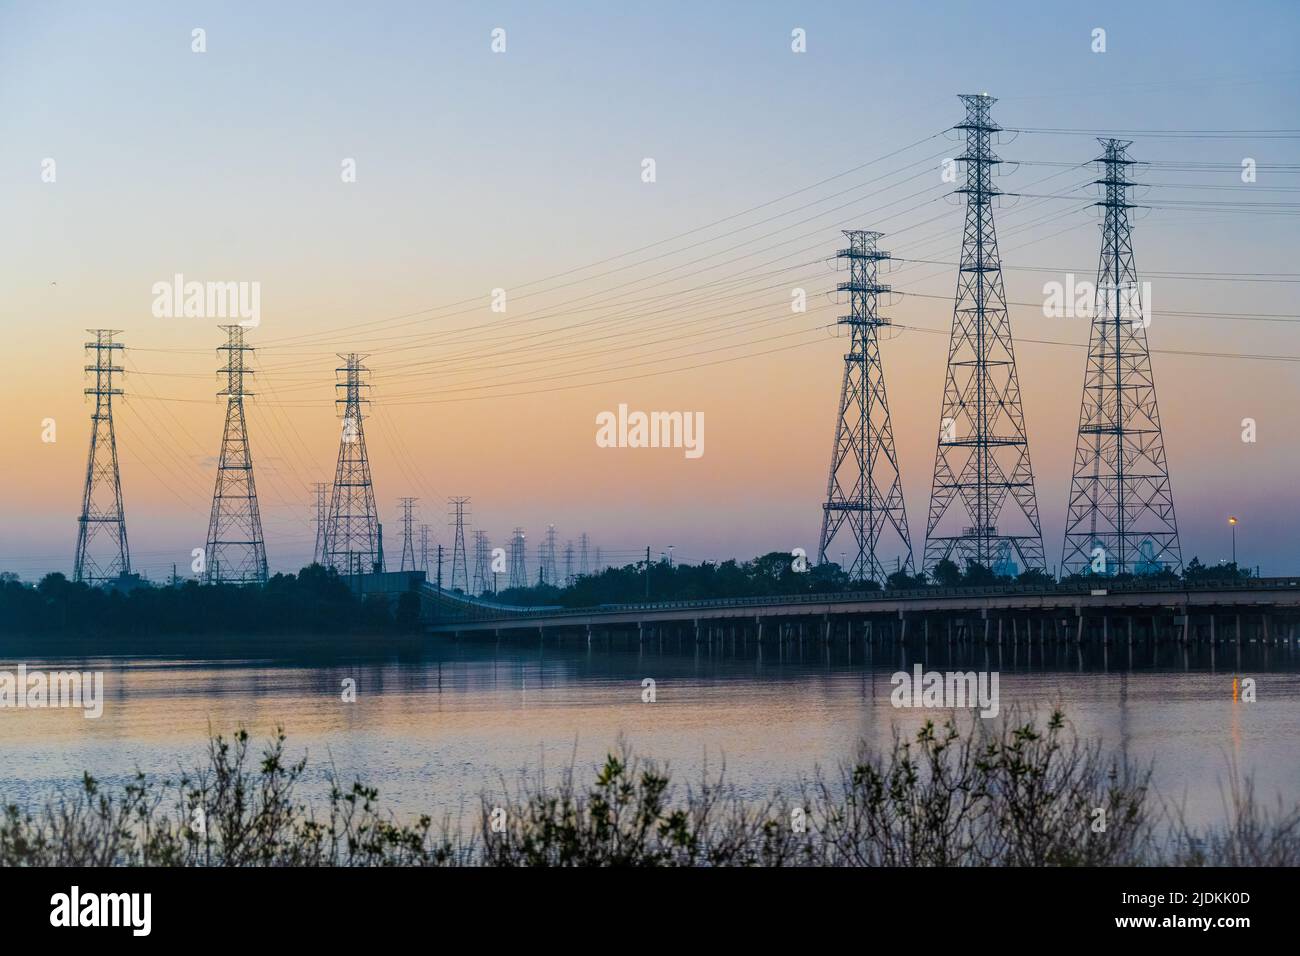 Transmission towers and a coal conveyor system at Blount Island on the St. Johns River in Jacksonville, FL, near the JEA Northside Generating Station. Stock Photo